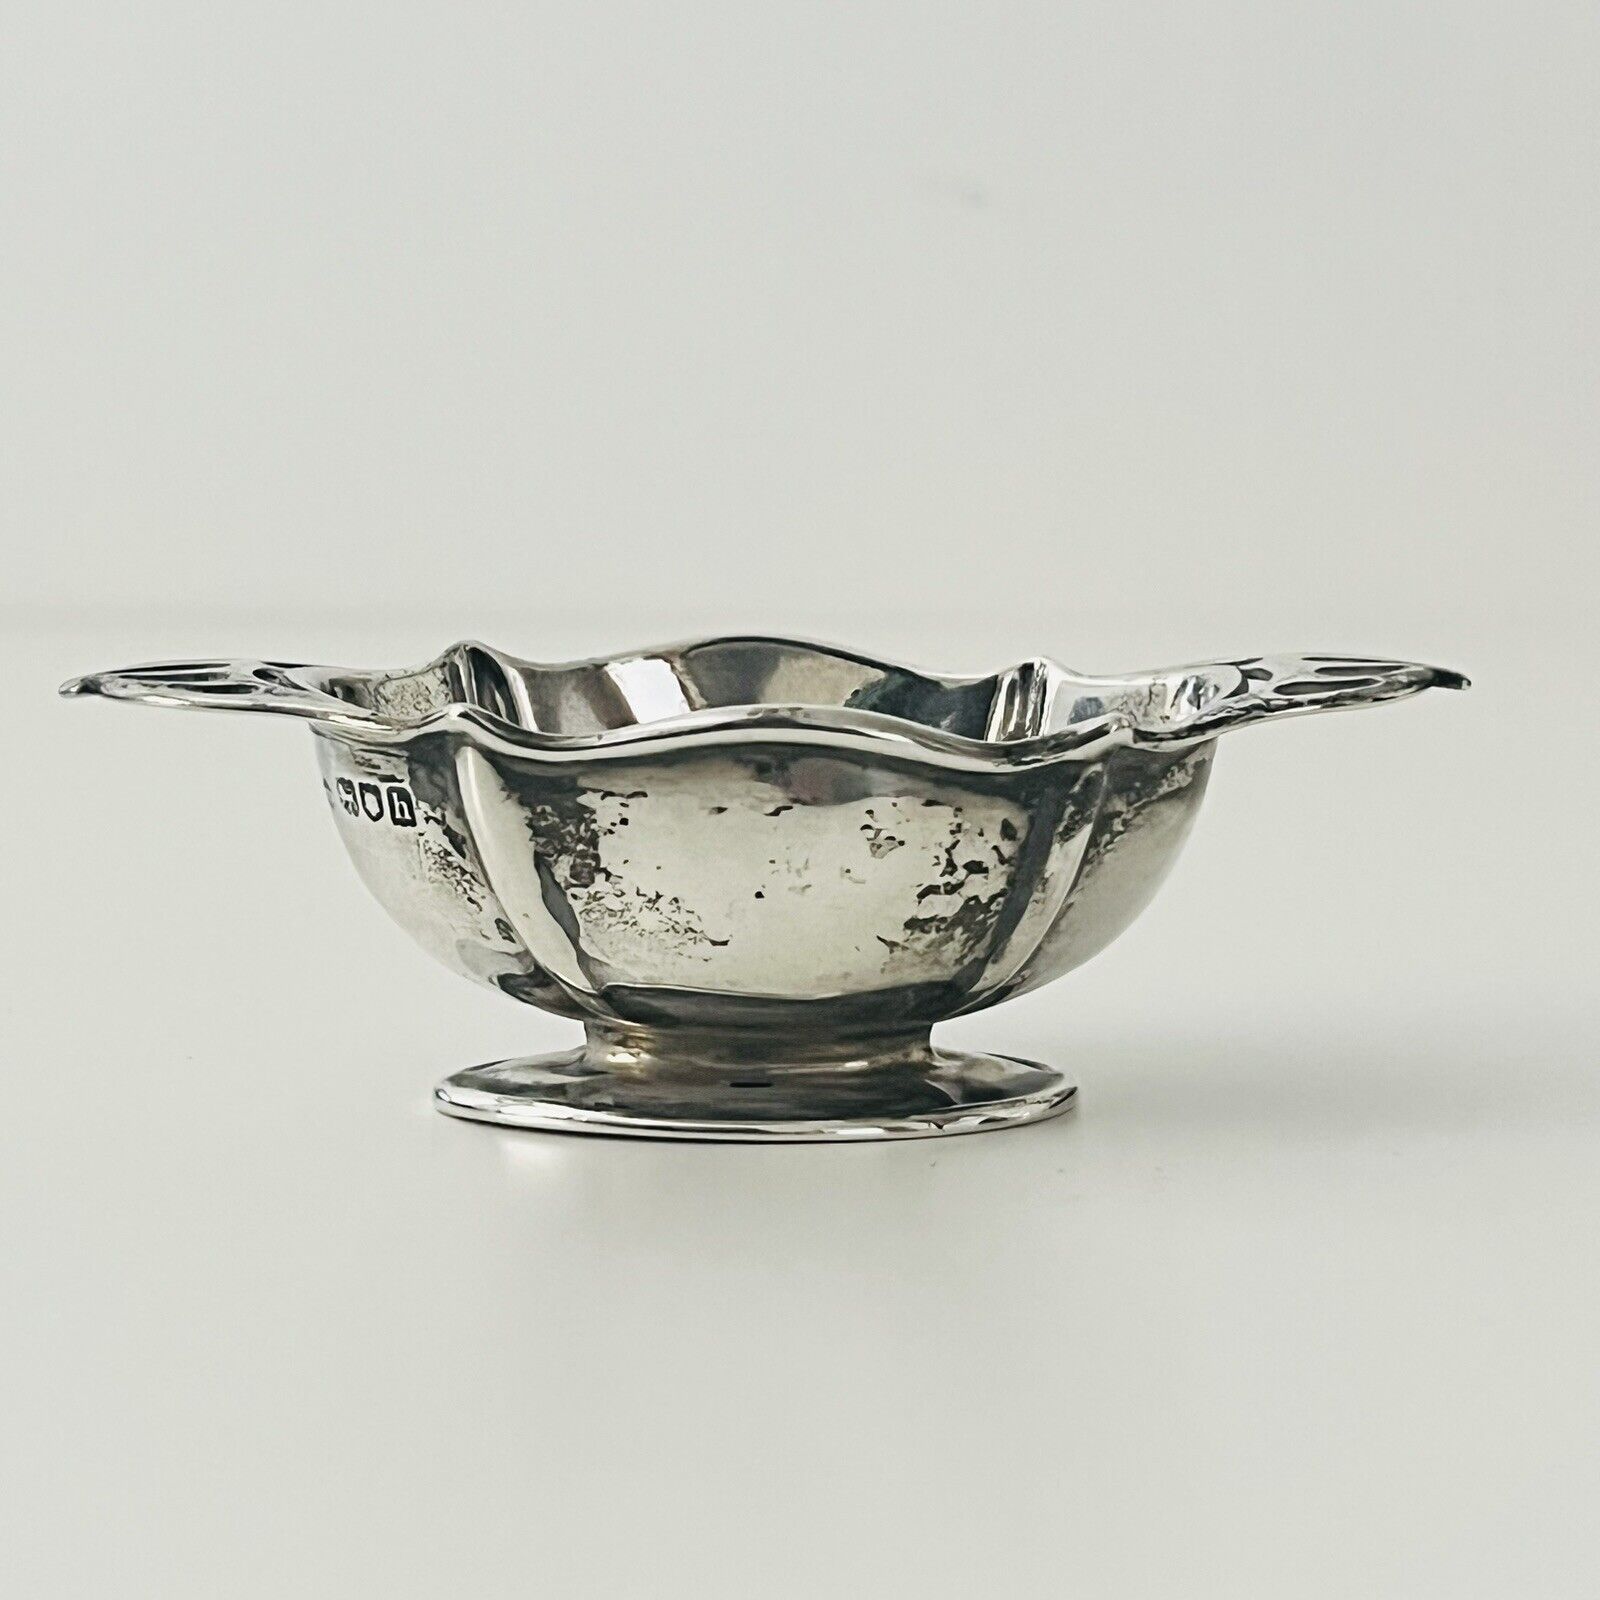 An Antique Edwardian Silver Drinking Cup Quaich, Hallmarked London 1903 - Image 4 of 8